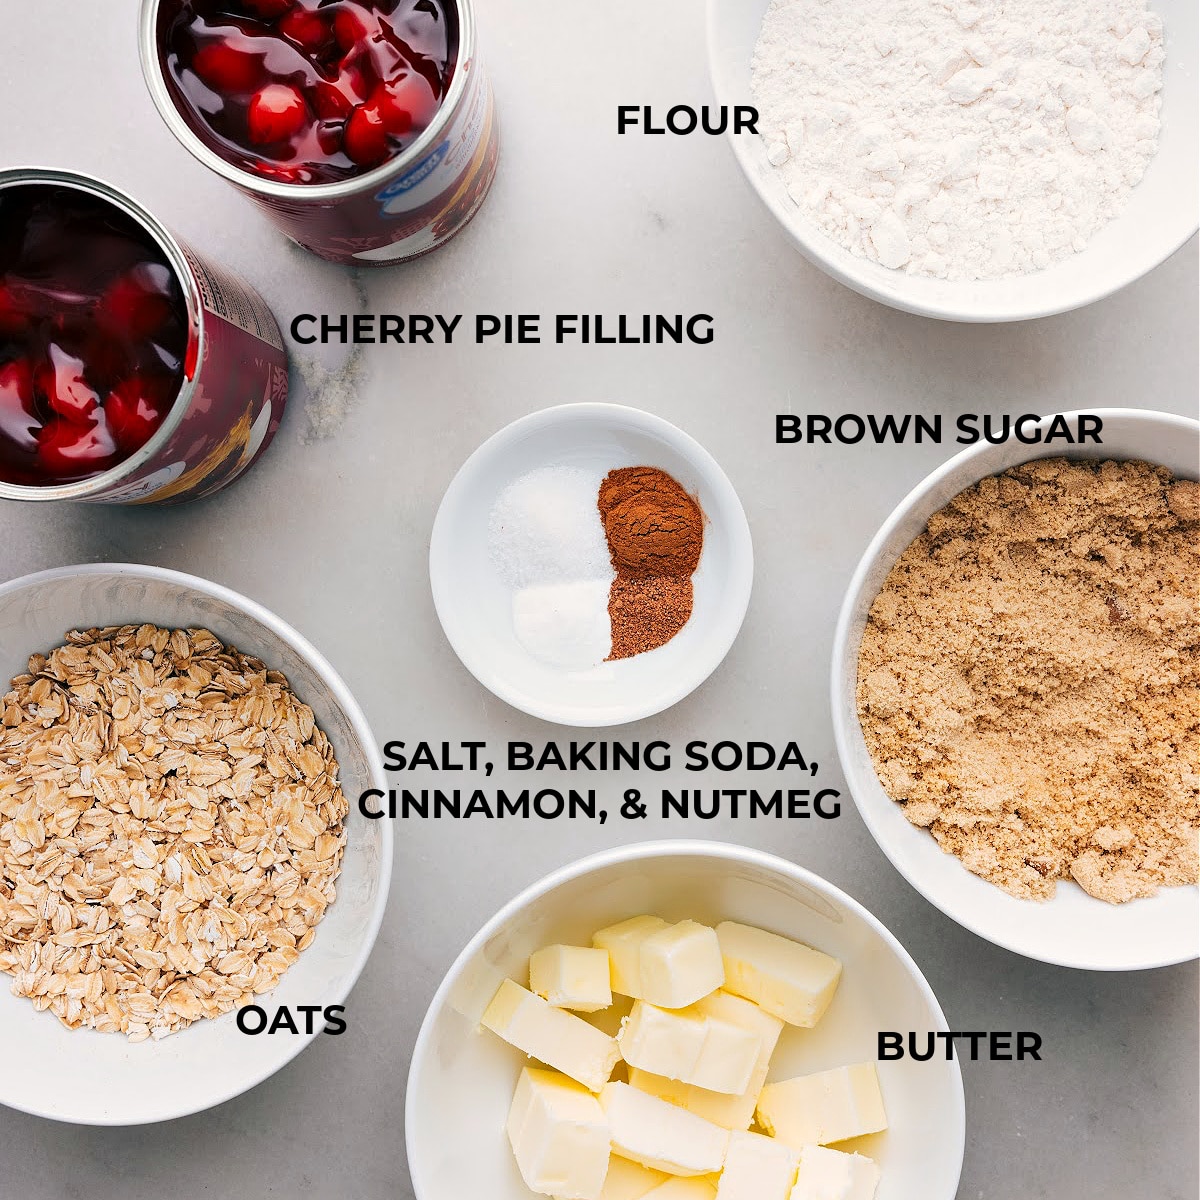 Ingredients used for the dessert, featuring cherries, oats, sugar, and more.